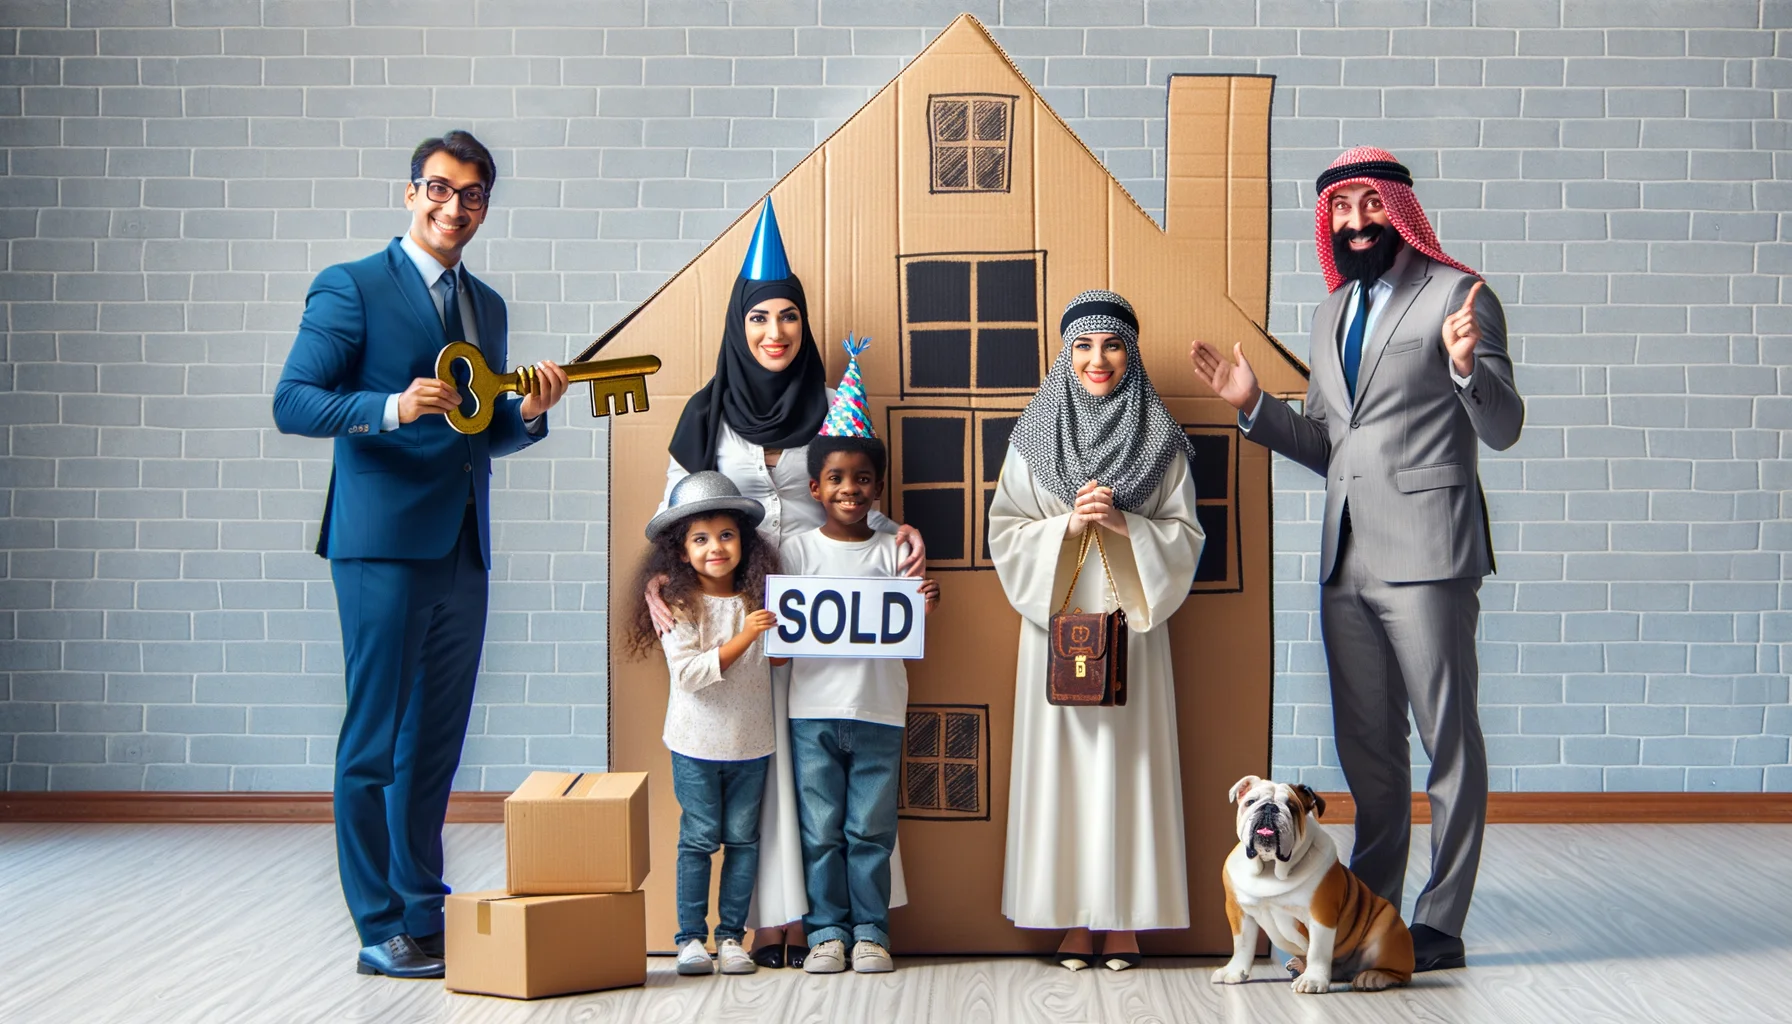 Generate a humorous and realistic image depicting an expat's home buying experience. Imagine a scenario where the expat family, comprised of a Middle-Eastern woman, a Hispanic man and their two Black children, are celebrating in a large cardboard house, complete with hand-drawn windows and a chimney. They are all wearing party hats and holding oversized keys. An eager real estate agent nearby, an Asian man, is presenting a huge 'SOLD' sign. Meanwhile, the bulldog beside them stares at the key curiously.